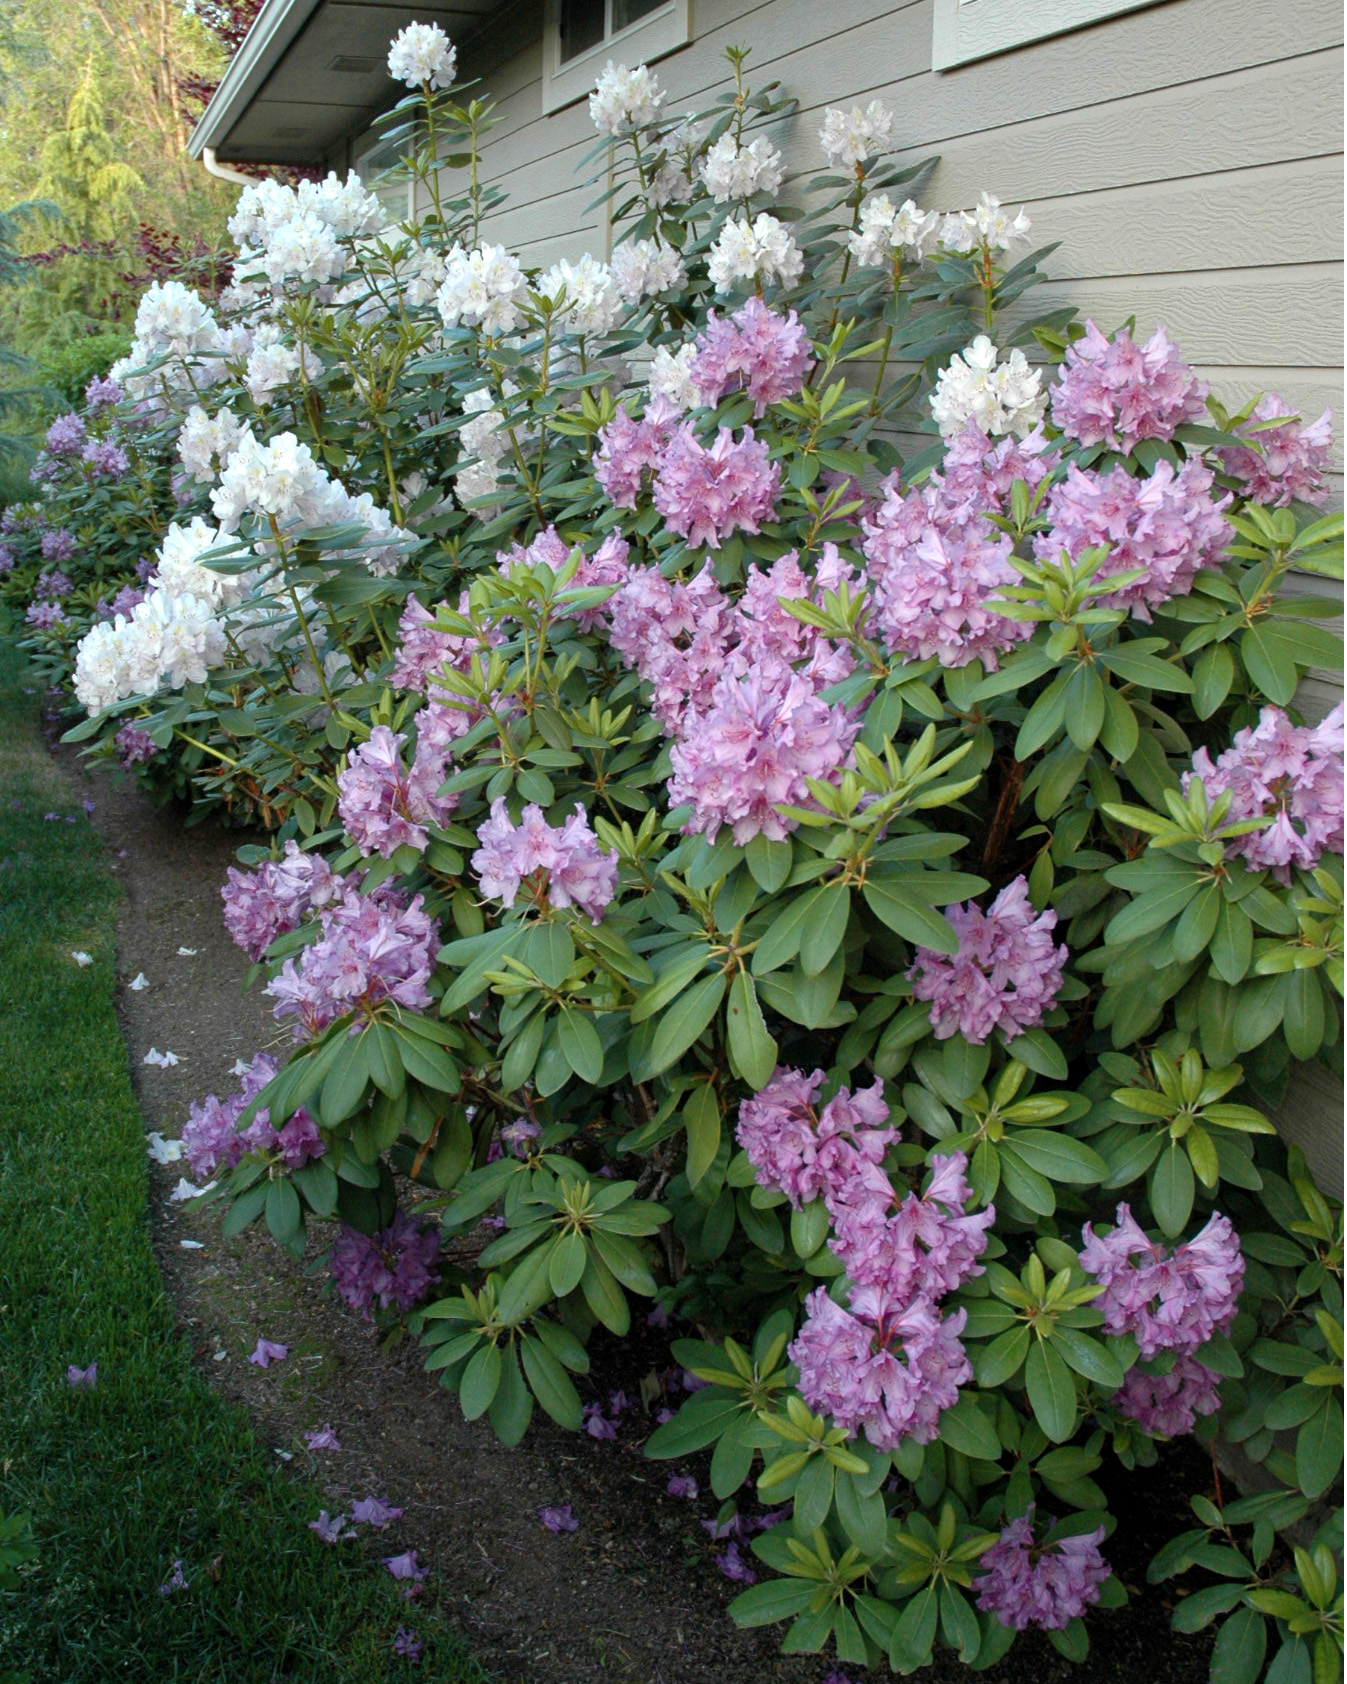 Rhododendrons, My Favorite Spring Shrub! “Stamping the